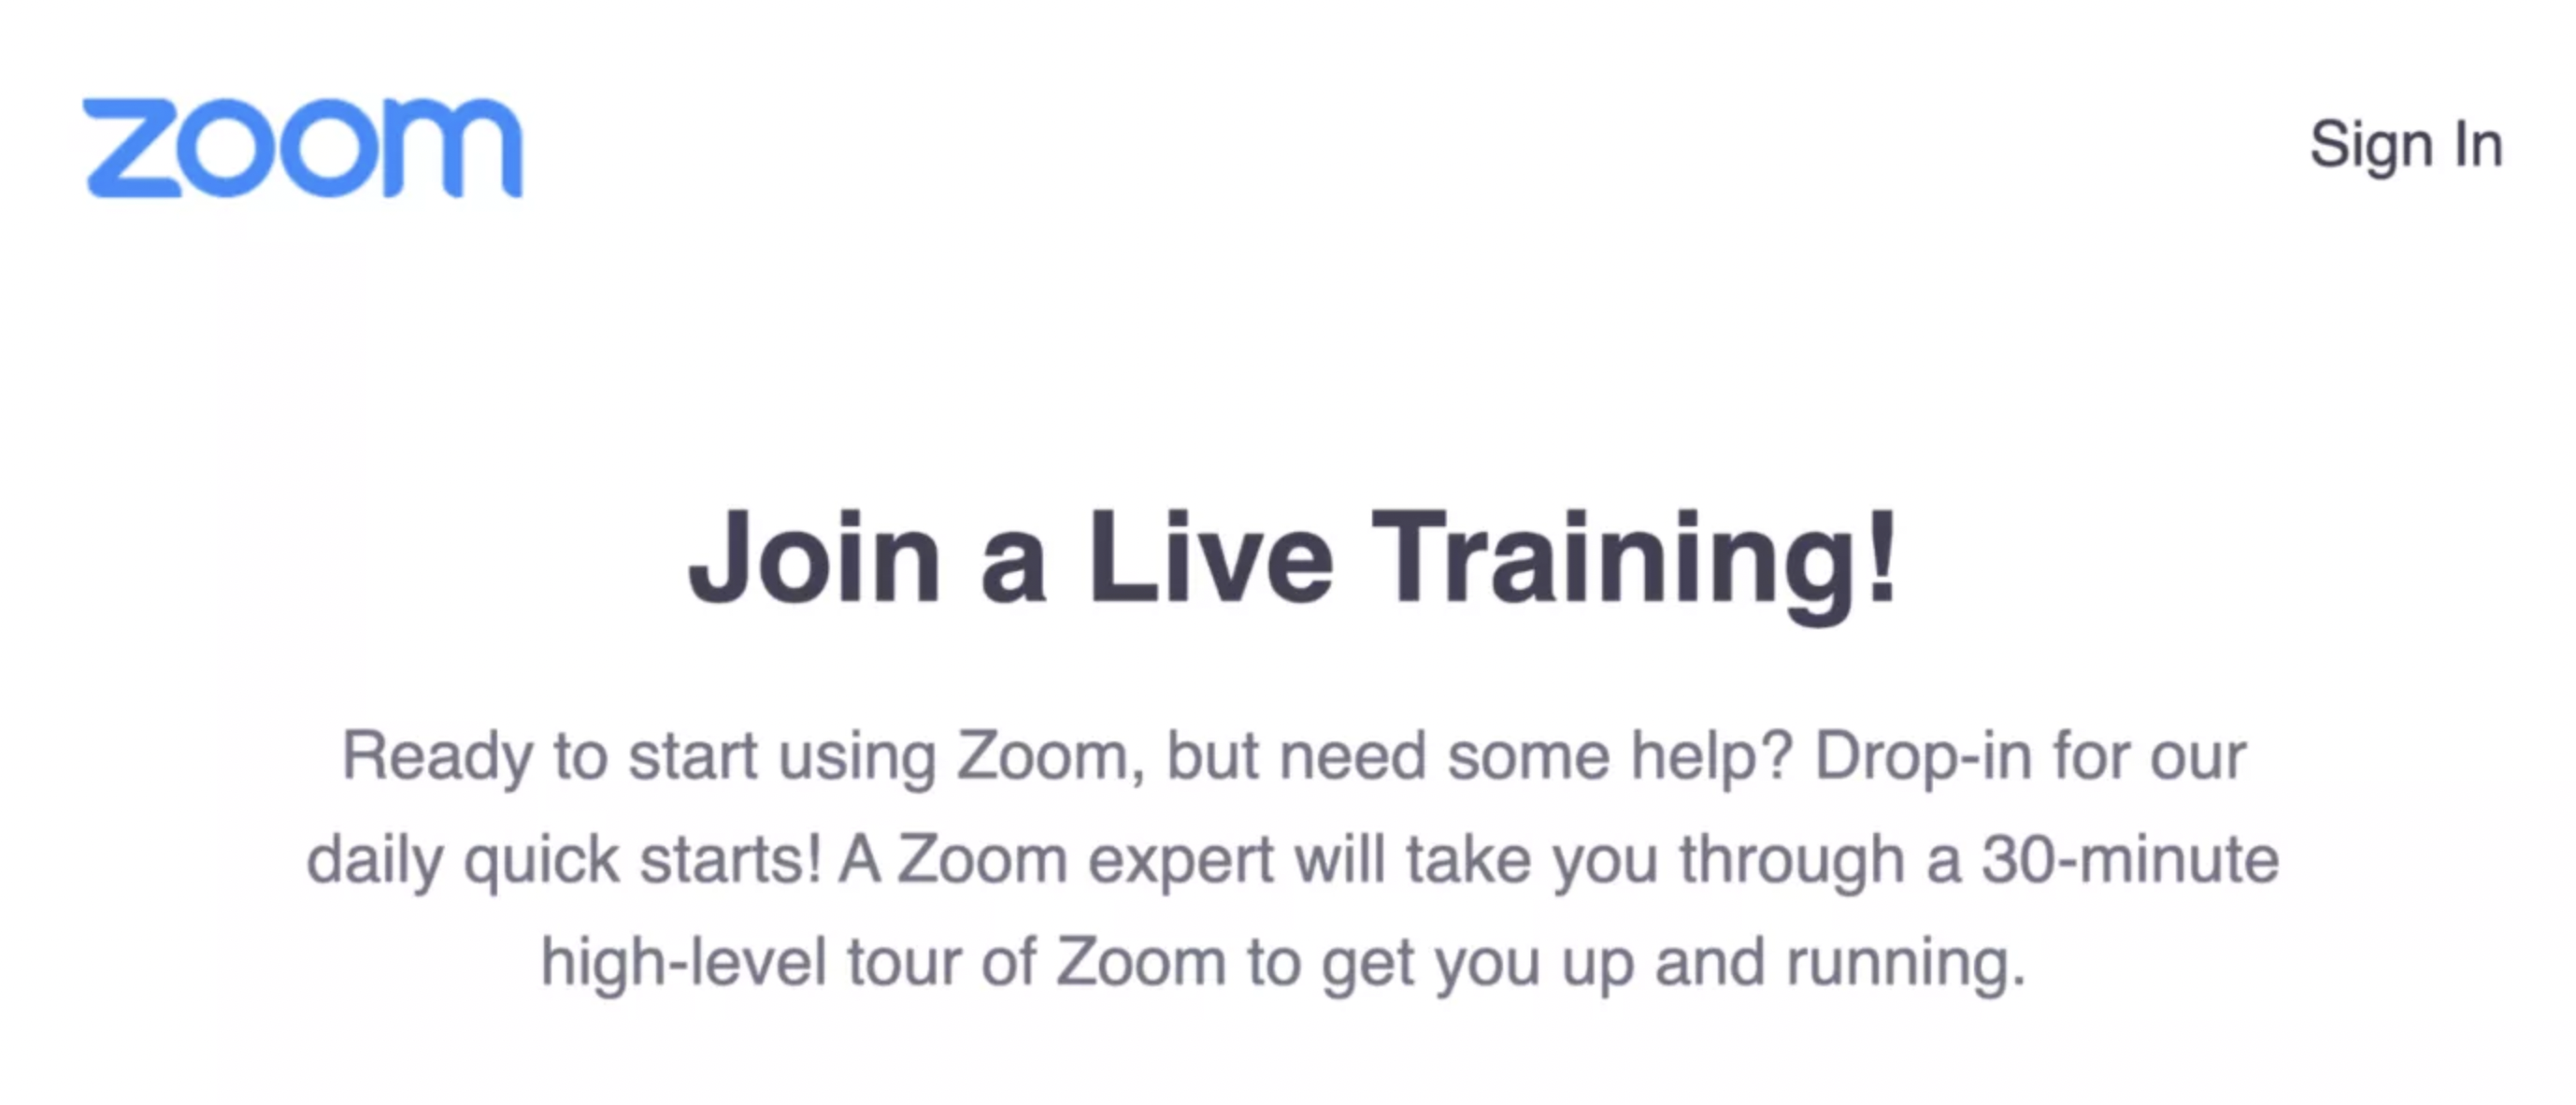 A screenshot of the Zoom website promoting a live training session, featuring email headers 